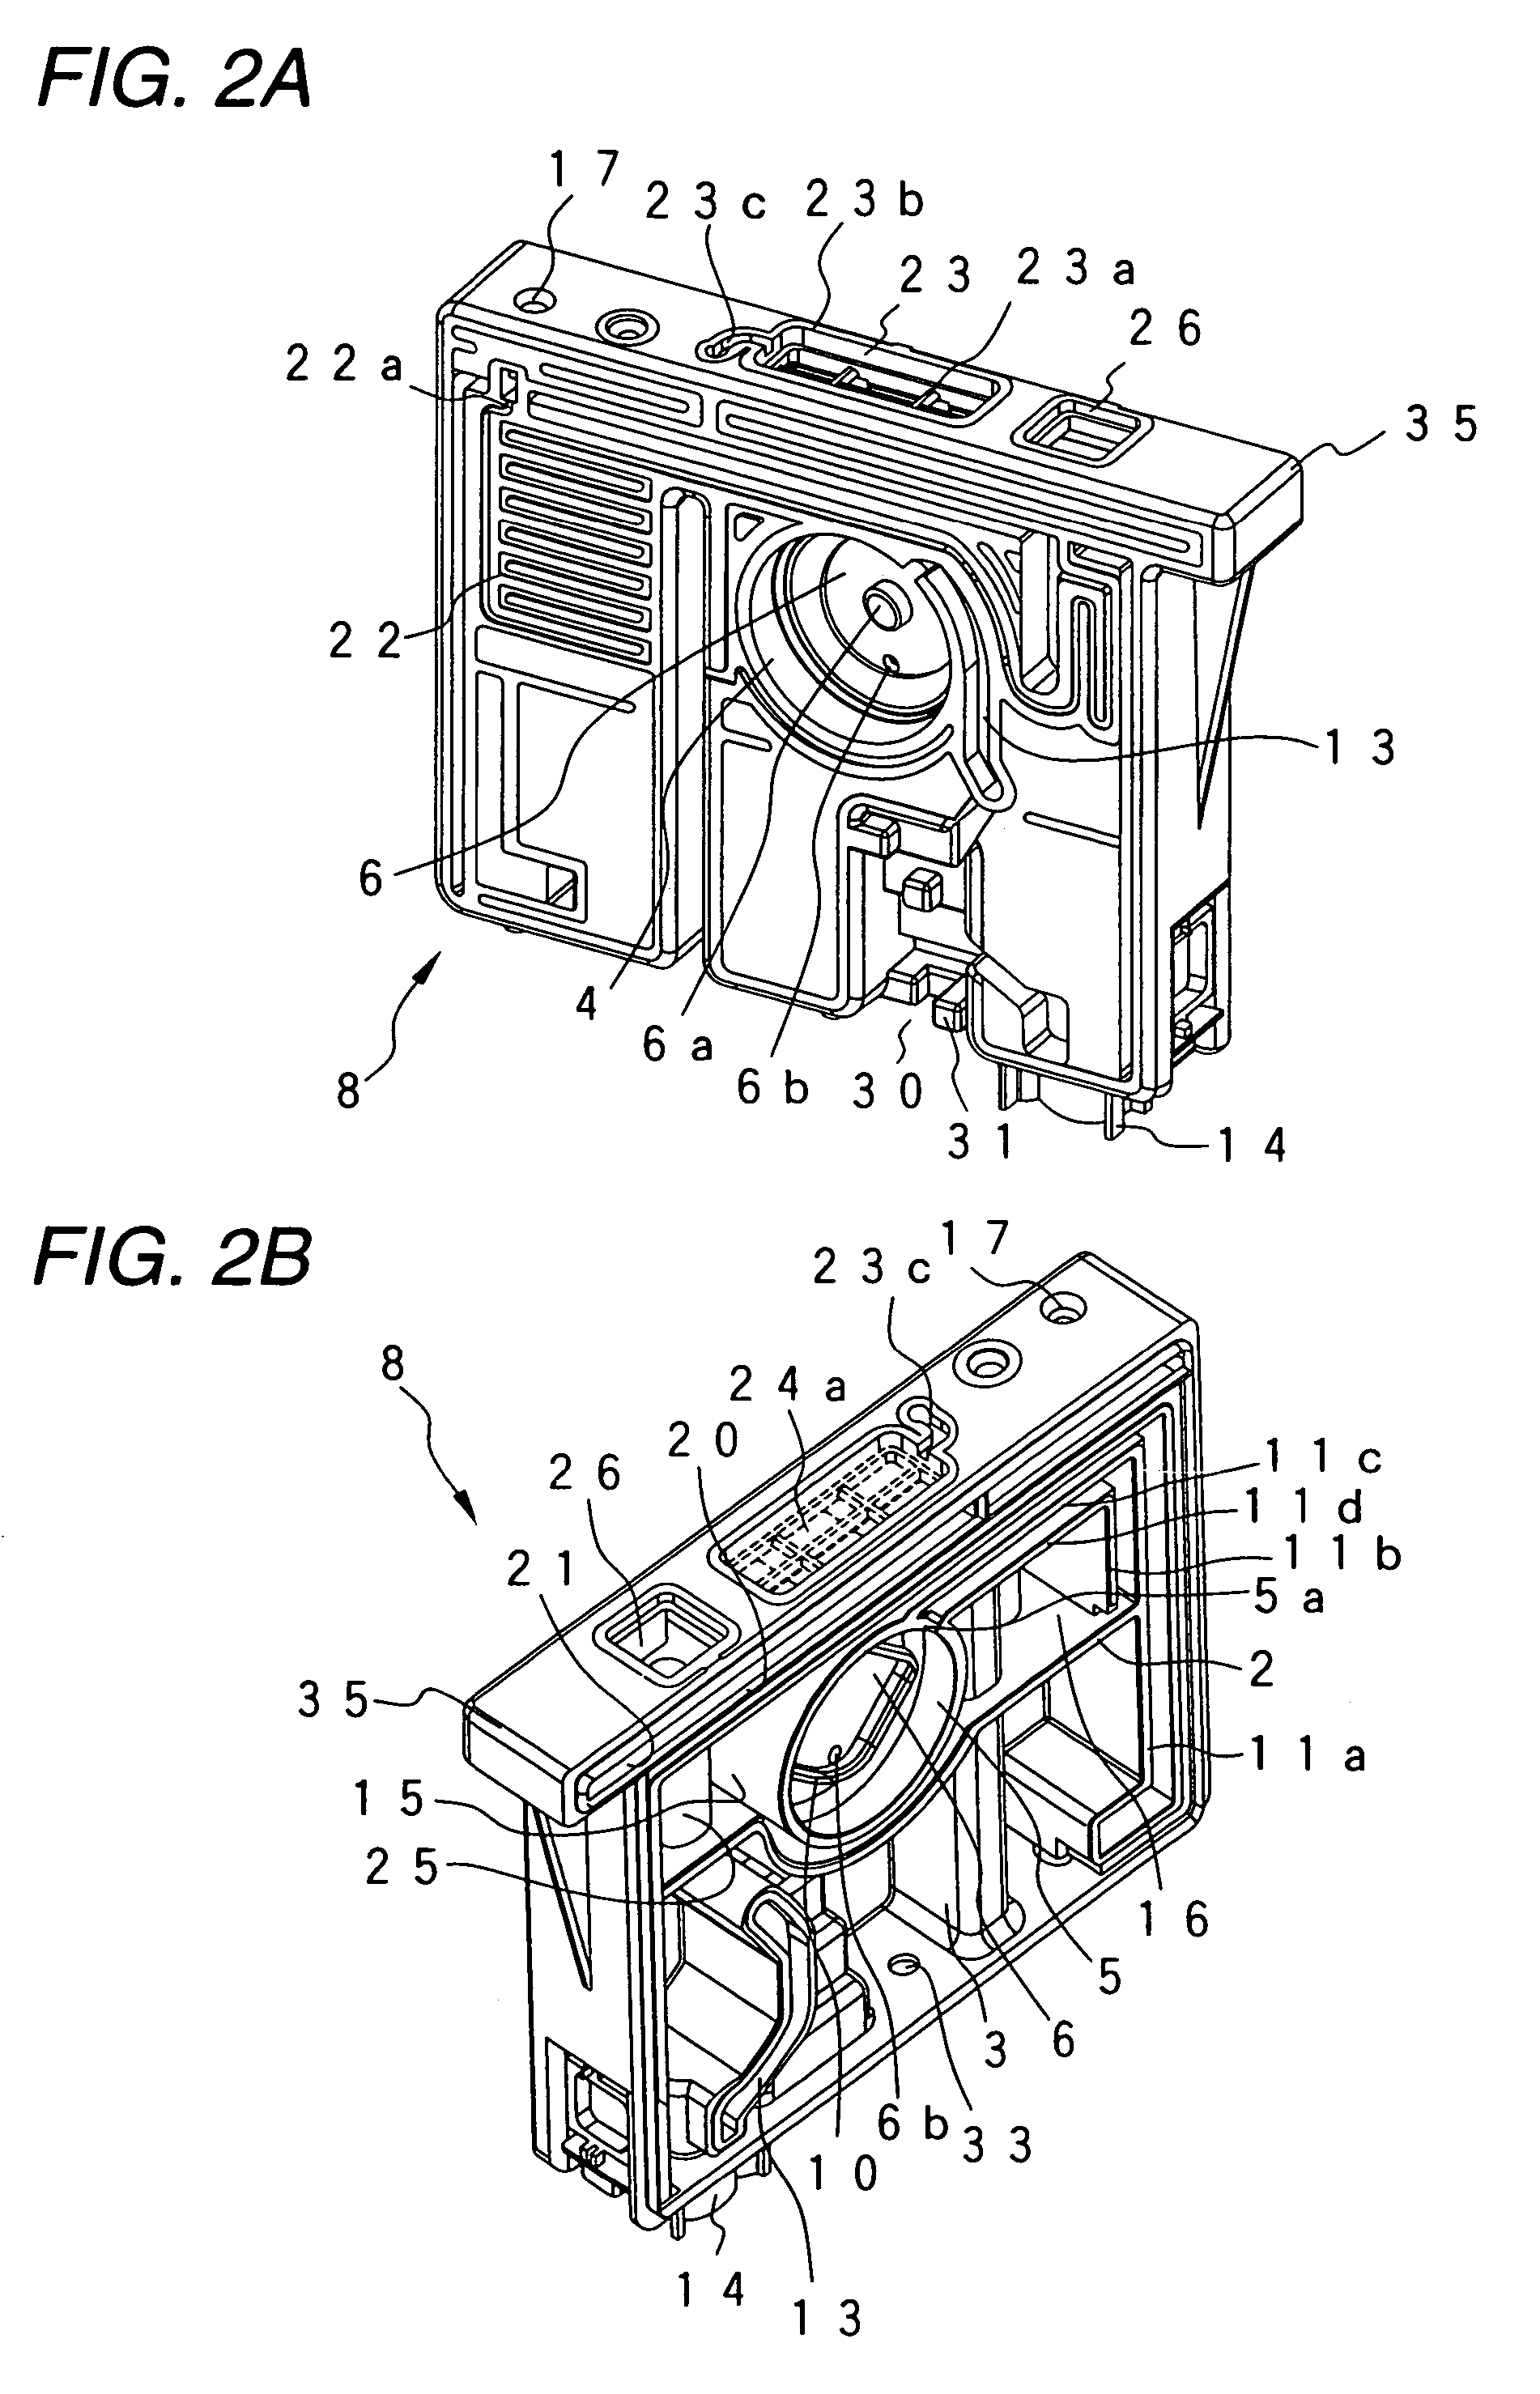 Ink-jet recording device and ink cartridge